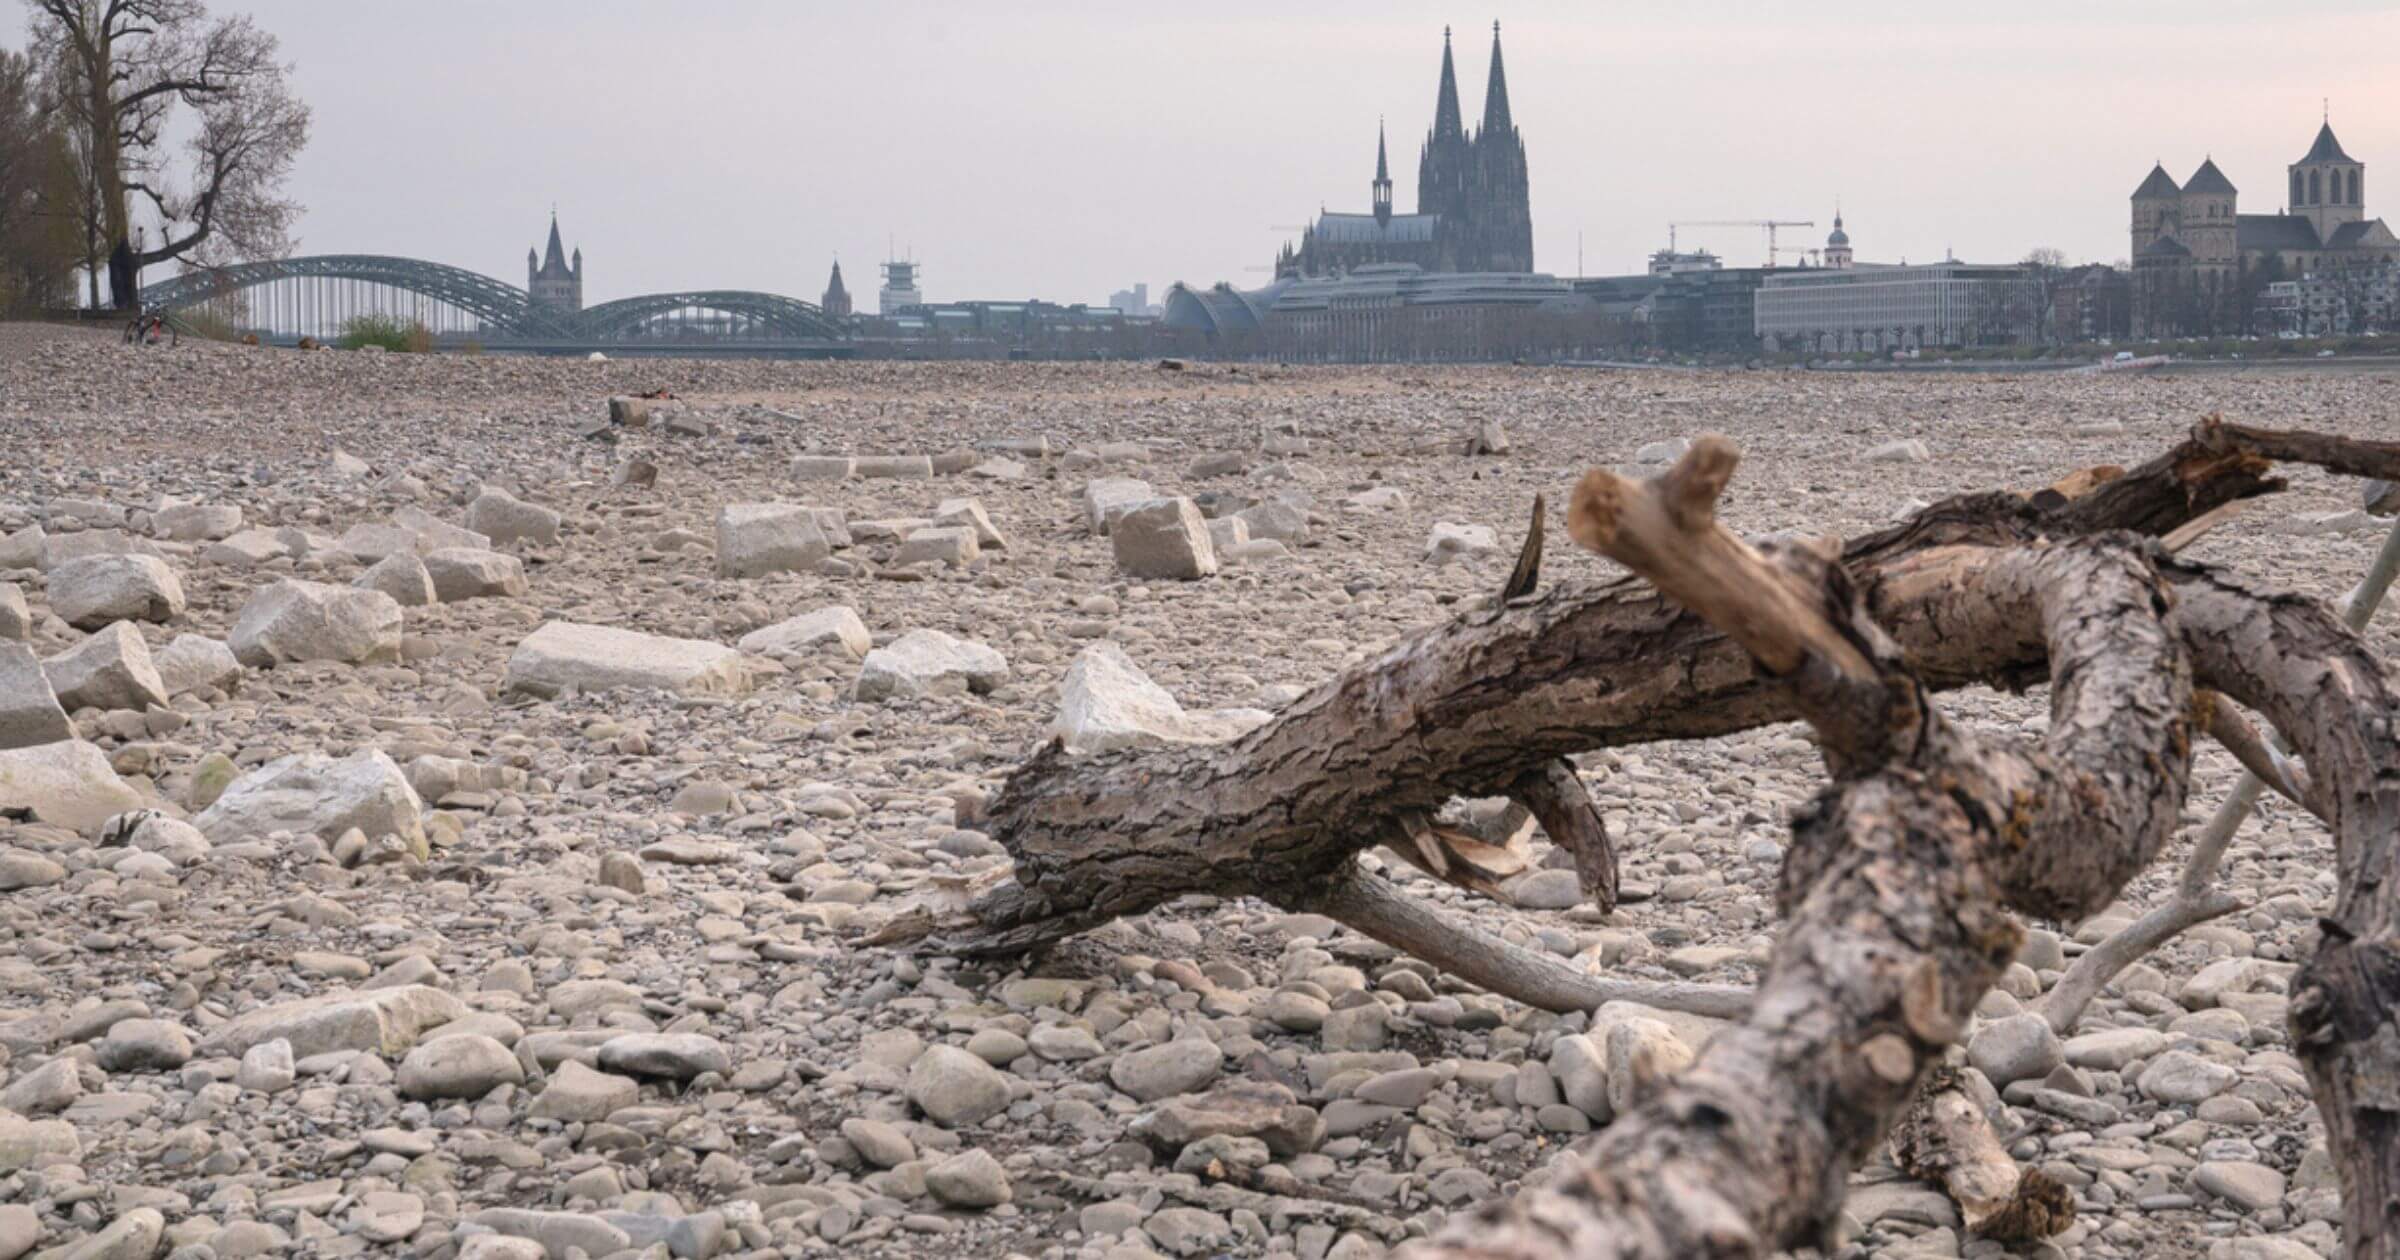 A dried out river with rocks and branches and a city skyline in the background